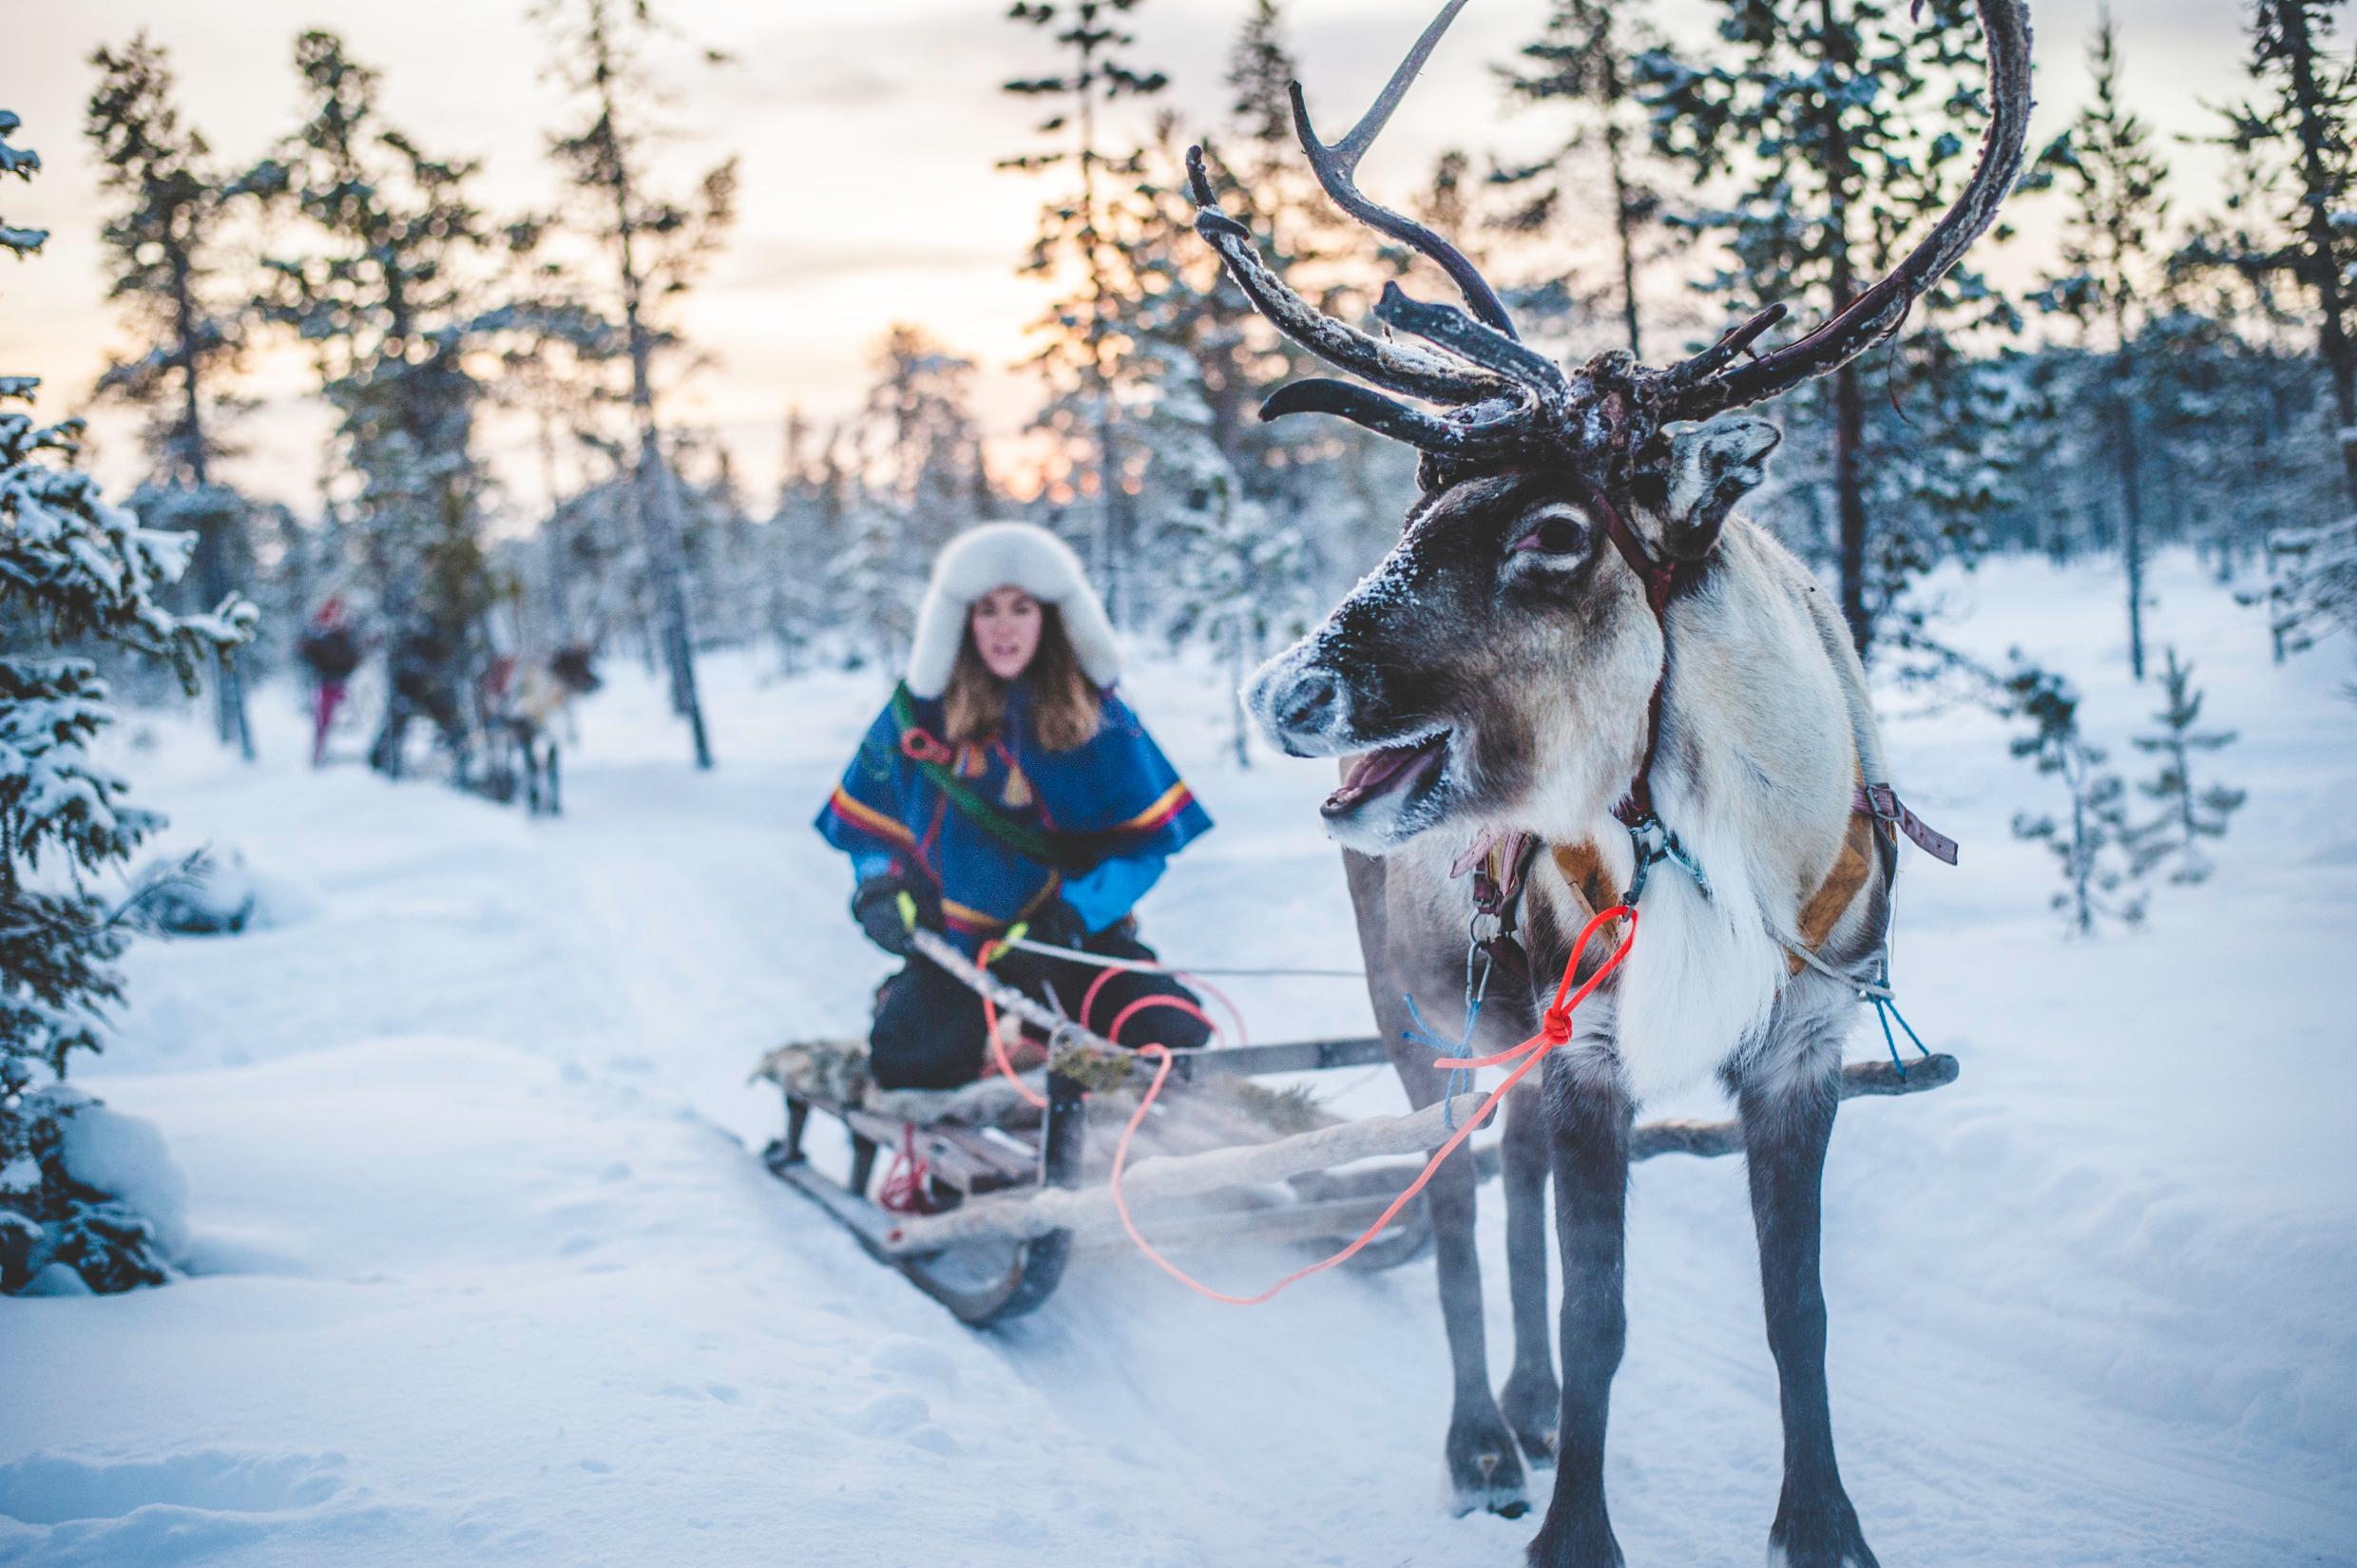 A Sami woman rides in a reindeer sled in a snowy winter forest. The Sami are both an indigenous people and one of Sweden's national minorities.